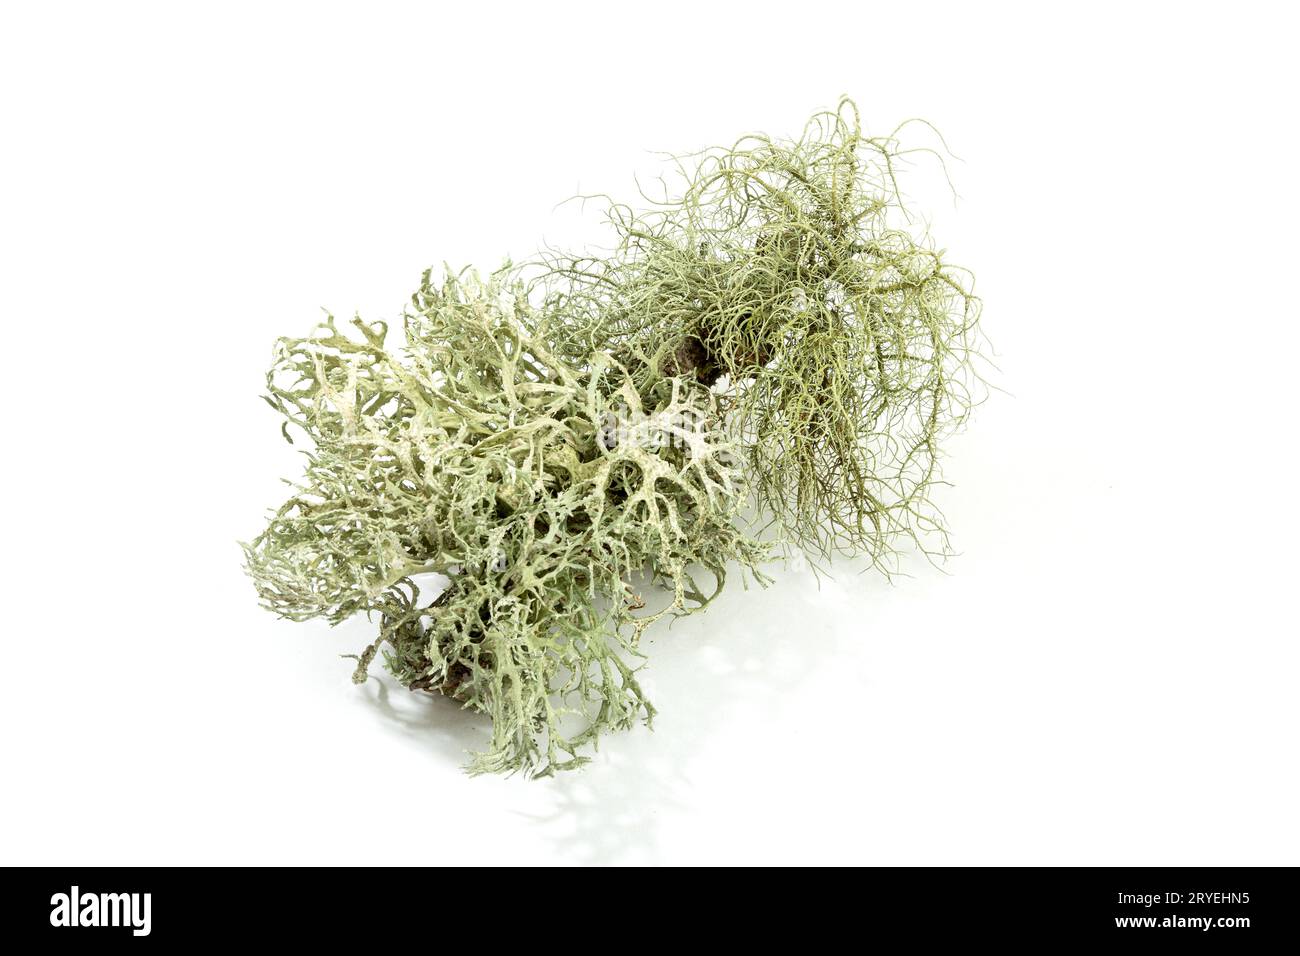 Lichen on tree branch isolated on white background Stock Photo